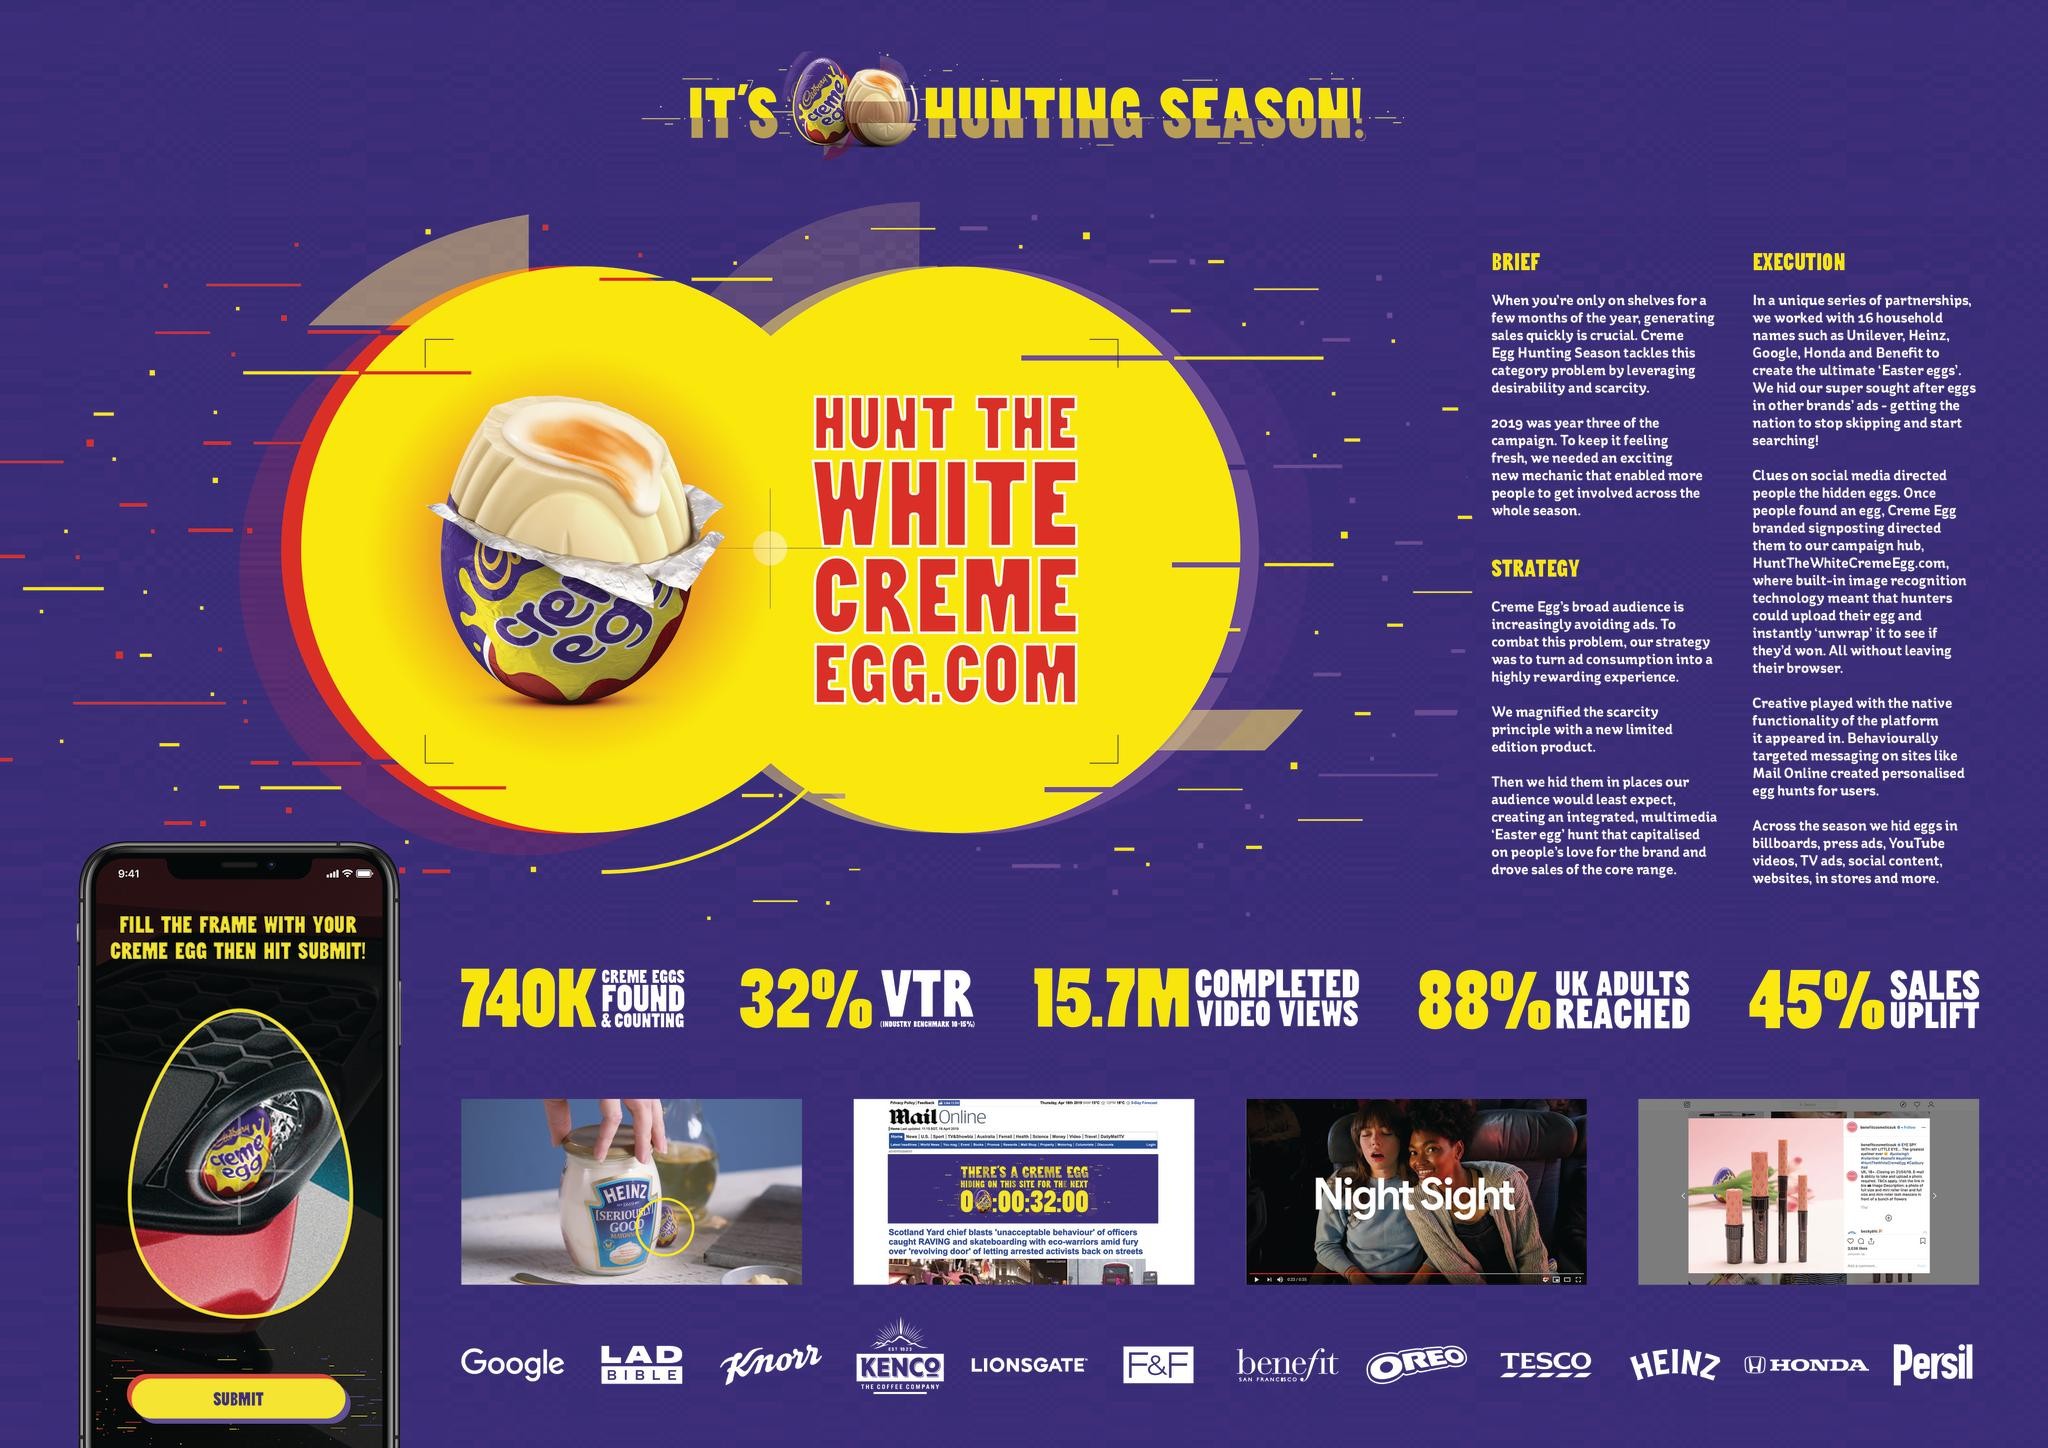 HUNT THE WHITE CREME EGG - EXPERIENCE